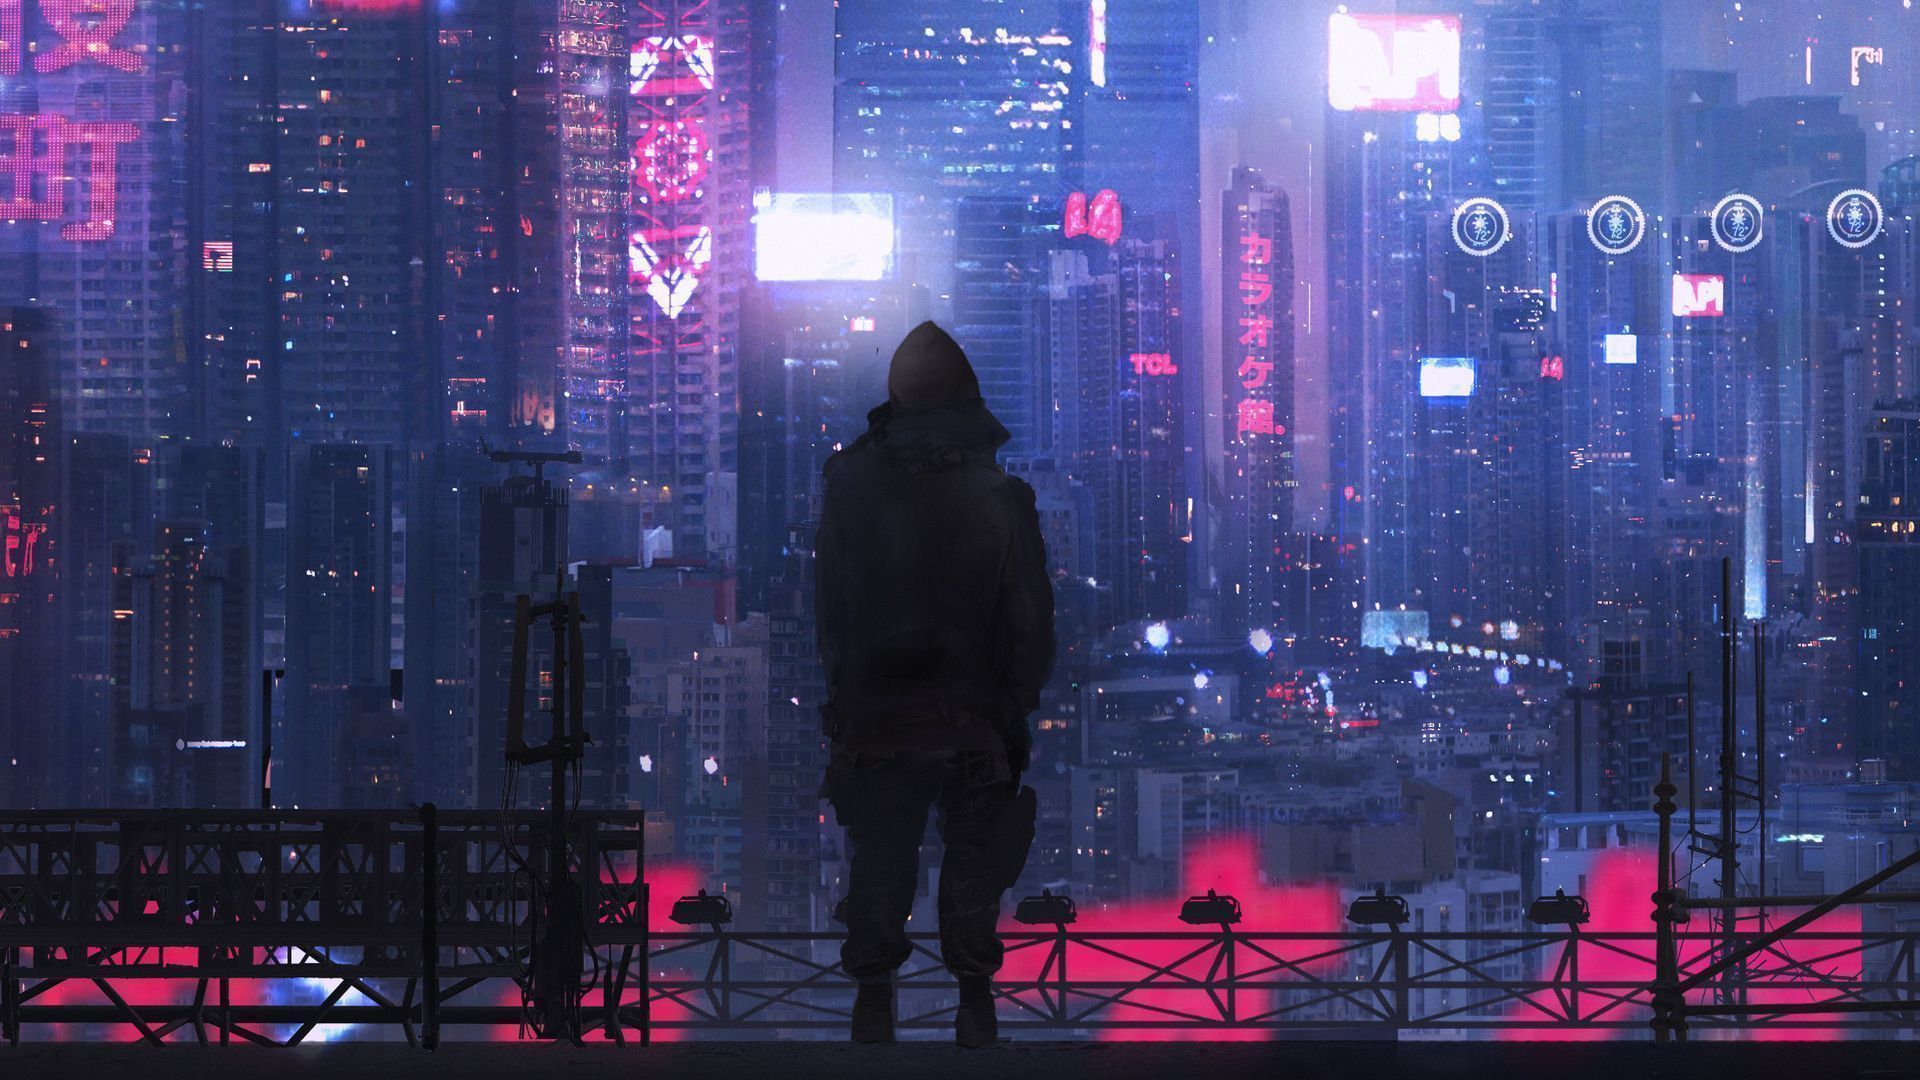 A man in a black hoodie standing on a rooftop looking at a cyberpunk city at night - Cyberpunk 2077